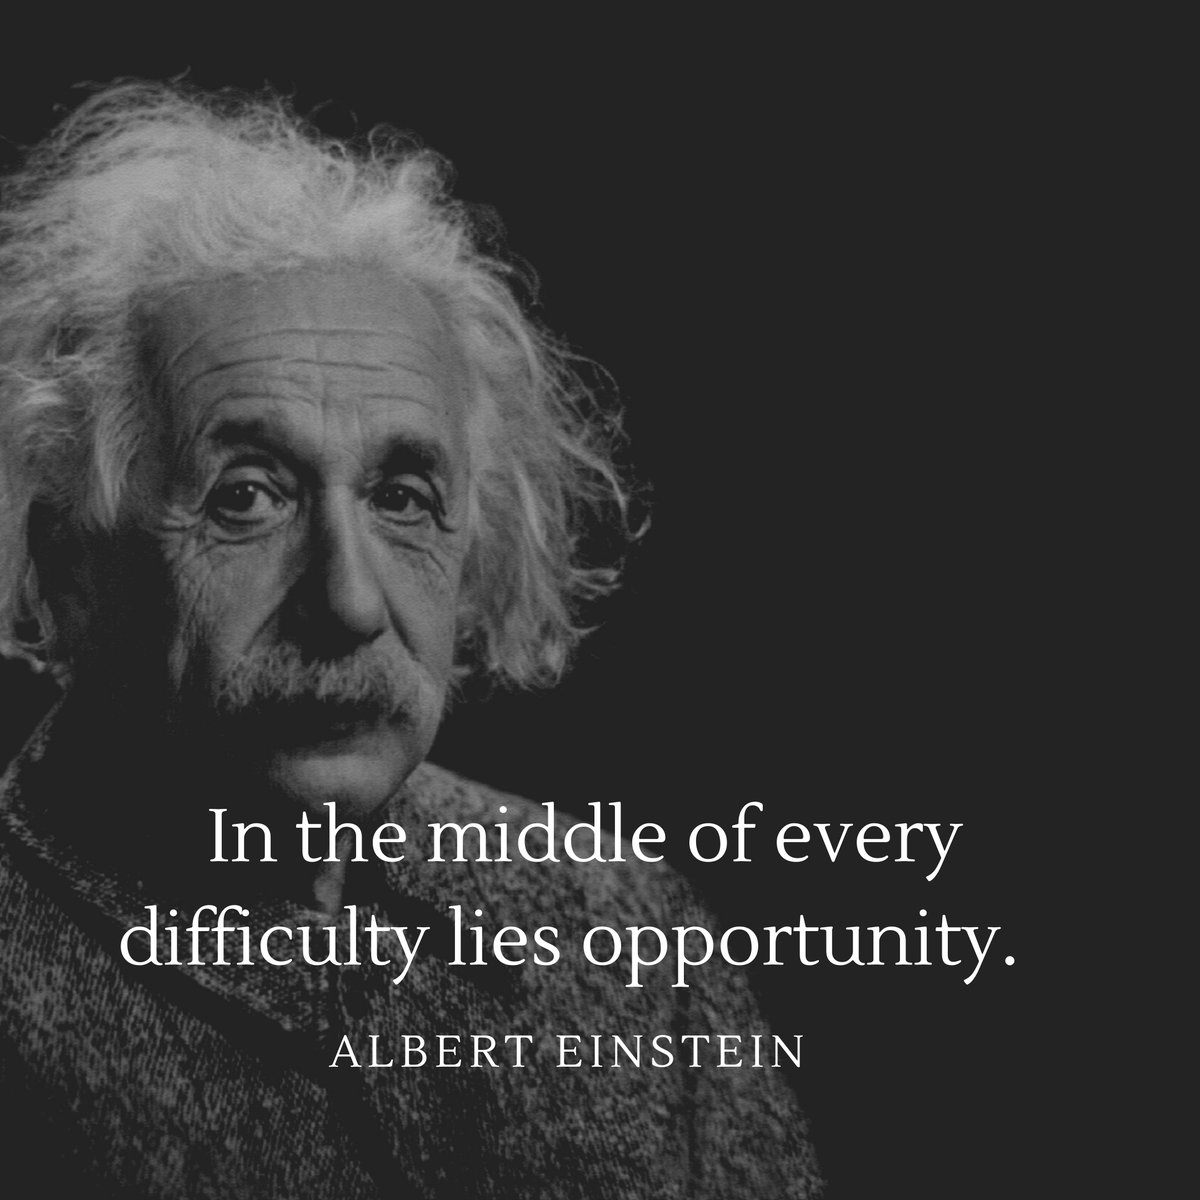 In the middle of every difficulty lies opportunity. ~ Albert Einstein (Theoretical Physicist)  via: https://t.co/uM8y9LfOzY https://t.co/GHEQok0Imw